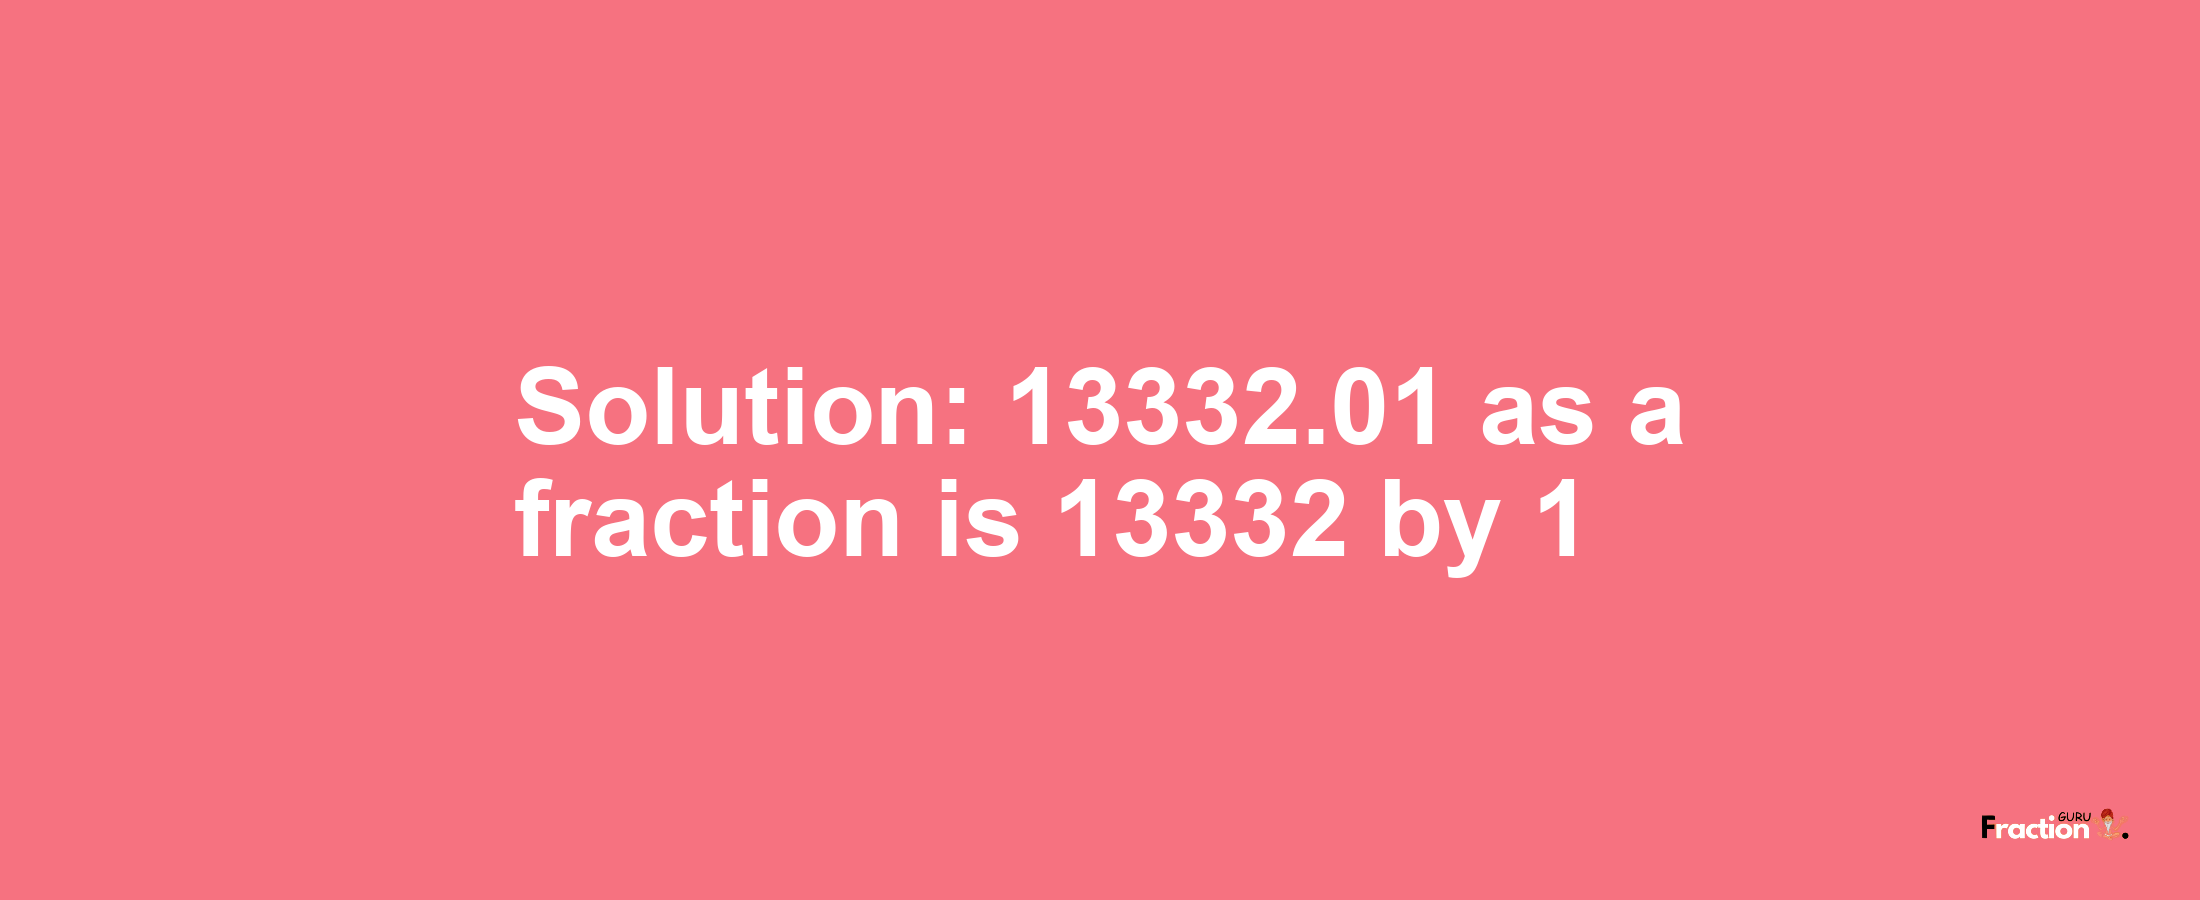 Solution:13332.01 as a fraction is 13332/1